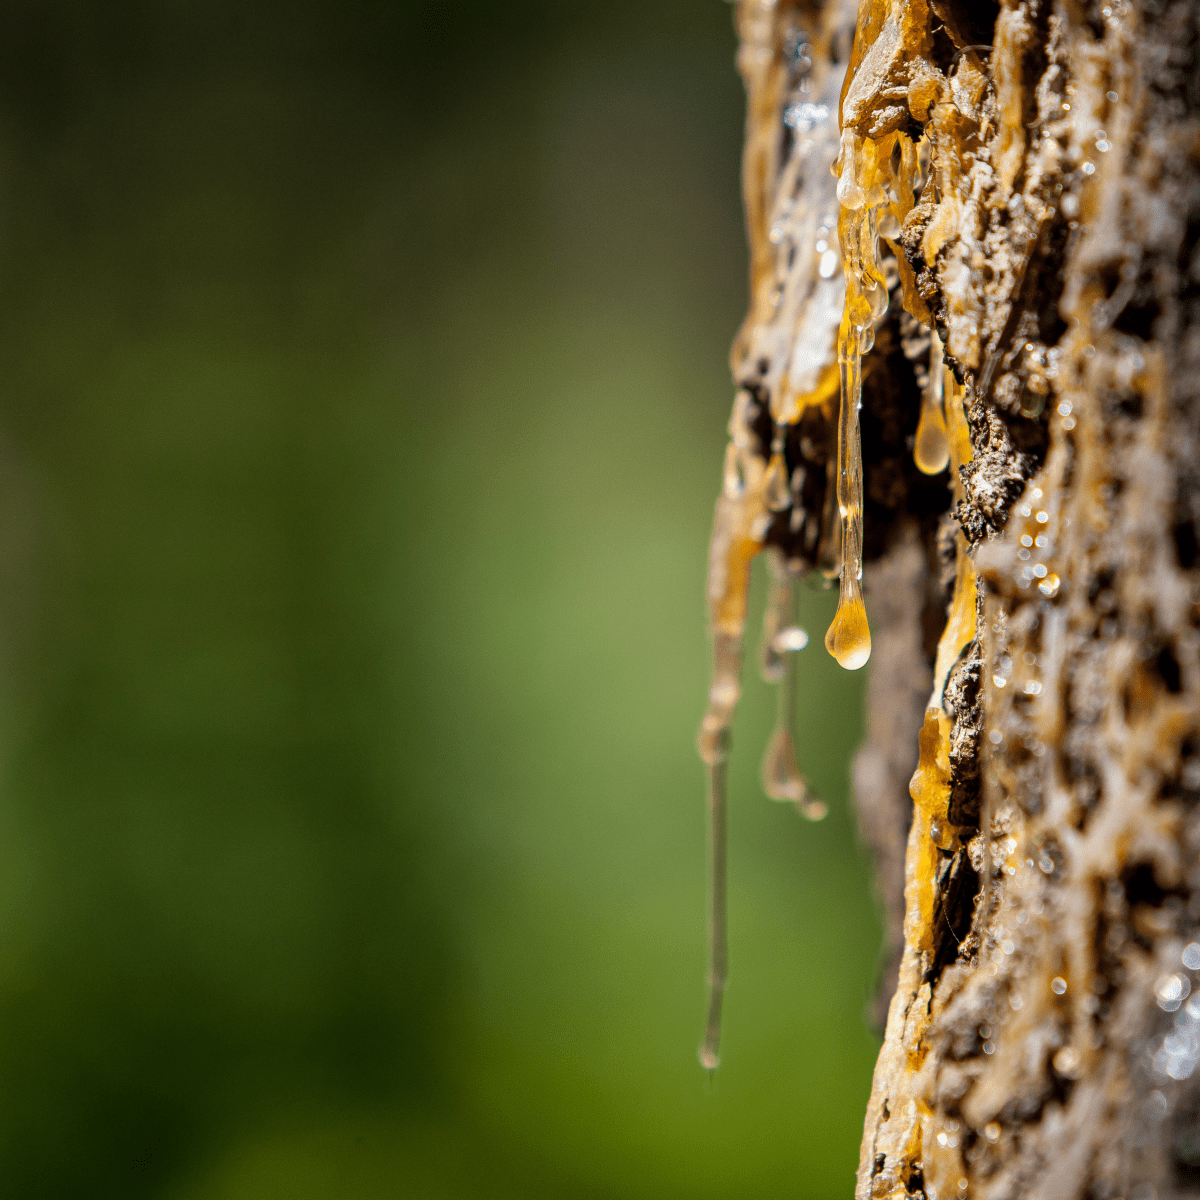 cleaning - Removing tree sap from exterior? - Motor Vehicle